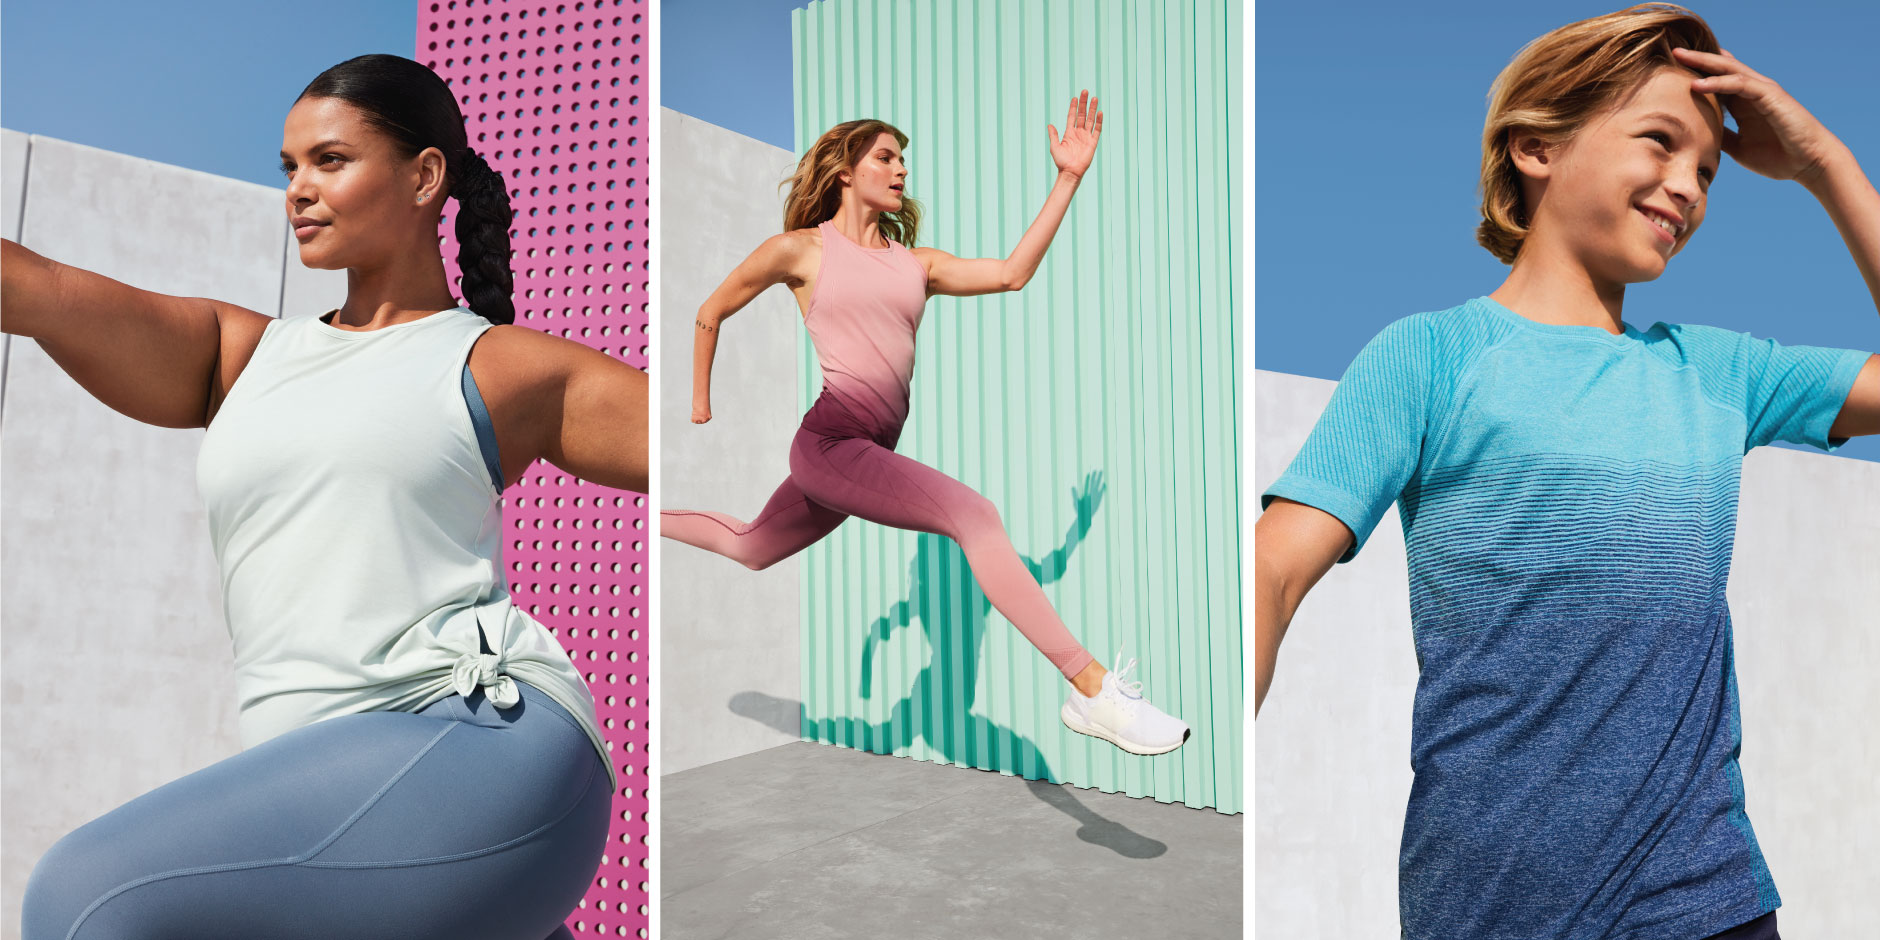 All In Motion Activewear for Men : Target